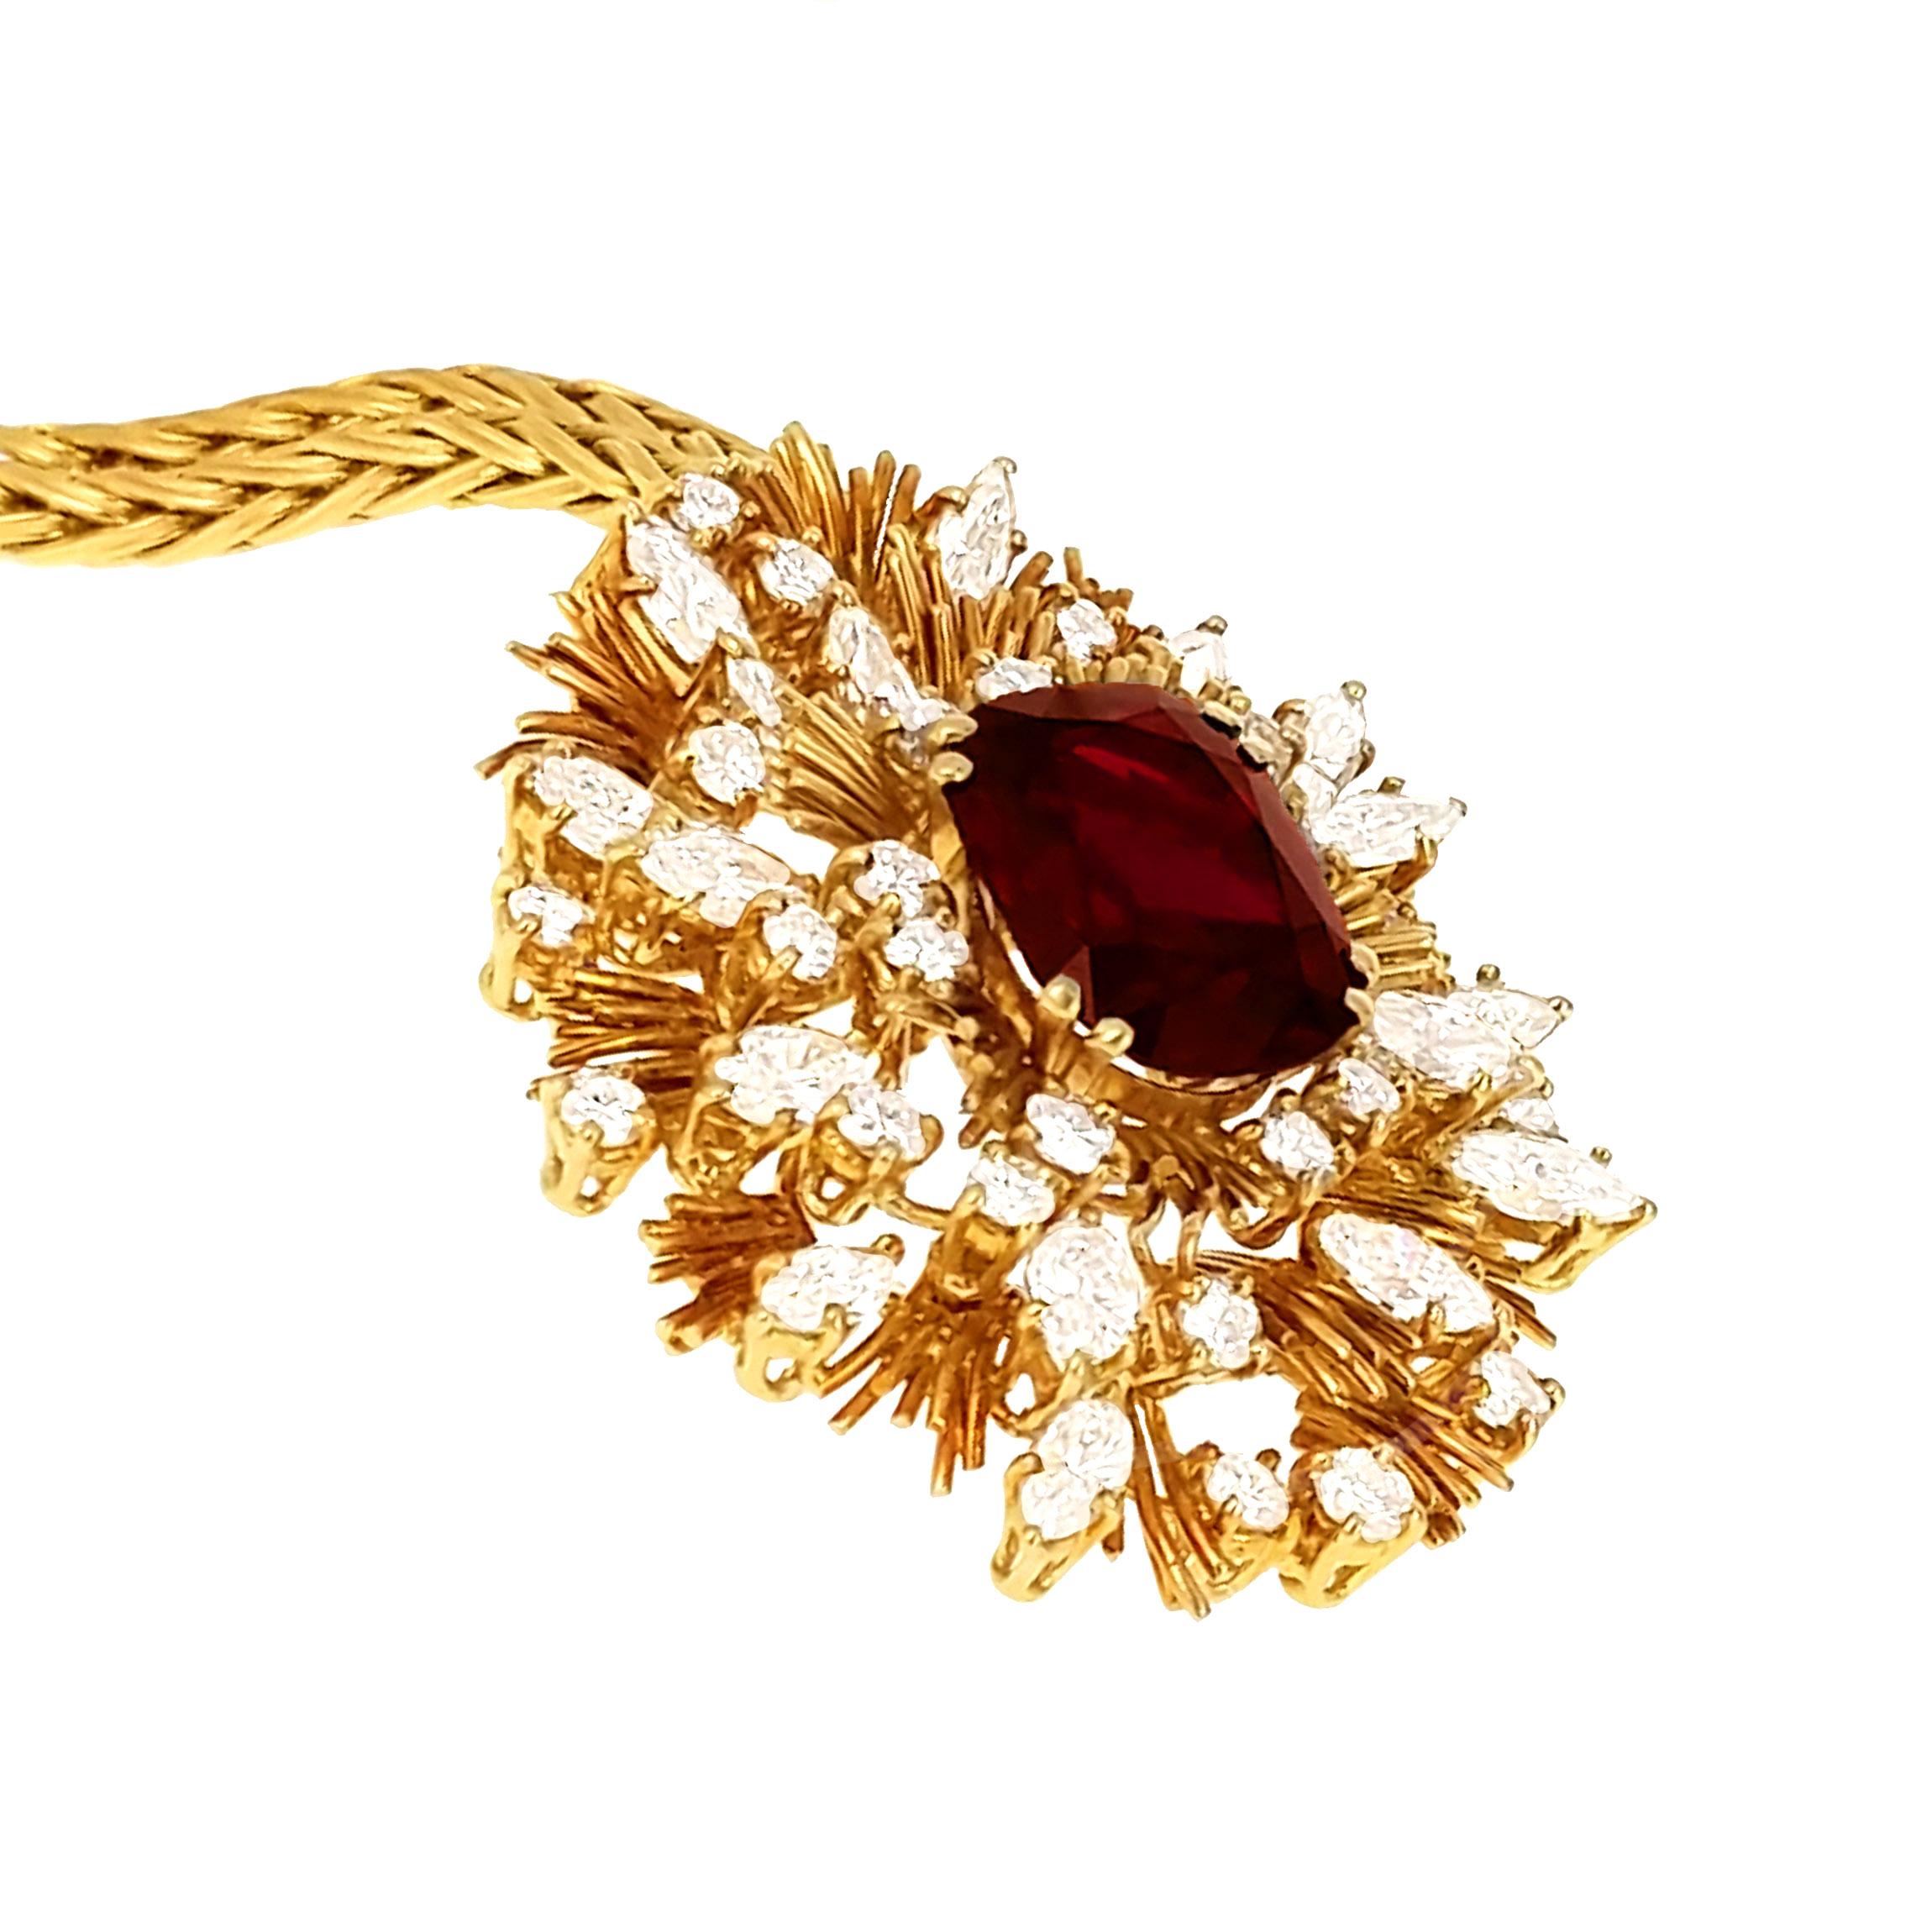 Cushion-shaped ruby and diamond abstract oval cluster pendant, the central ruby weighing 7.64 carats in a ribbed gold sunburst surround embellished with circular and navette-cut diamonds, suspended from a gold foxtail link chain.

With report no CS